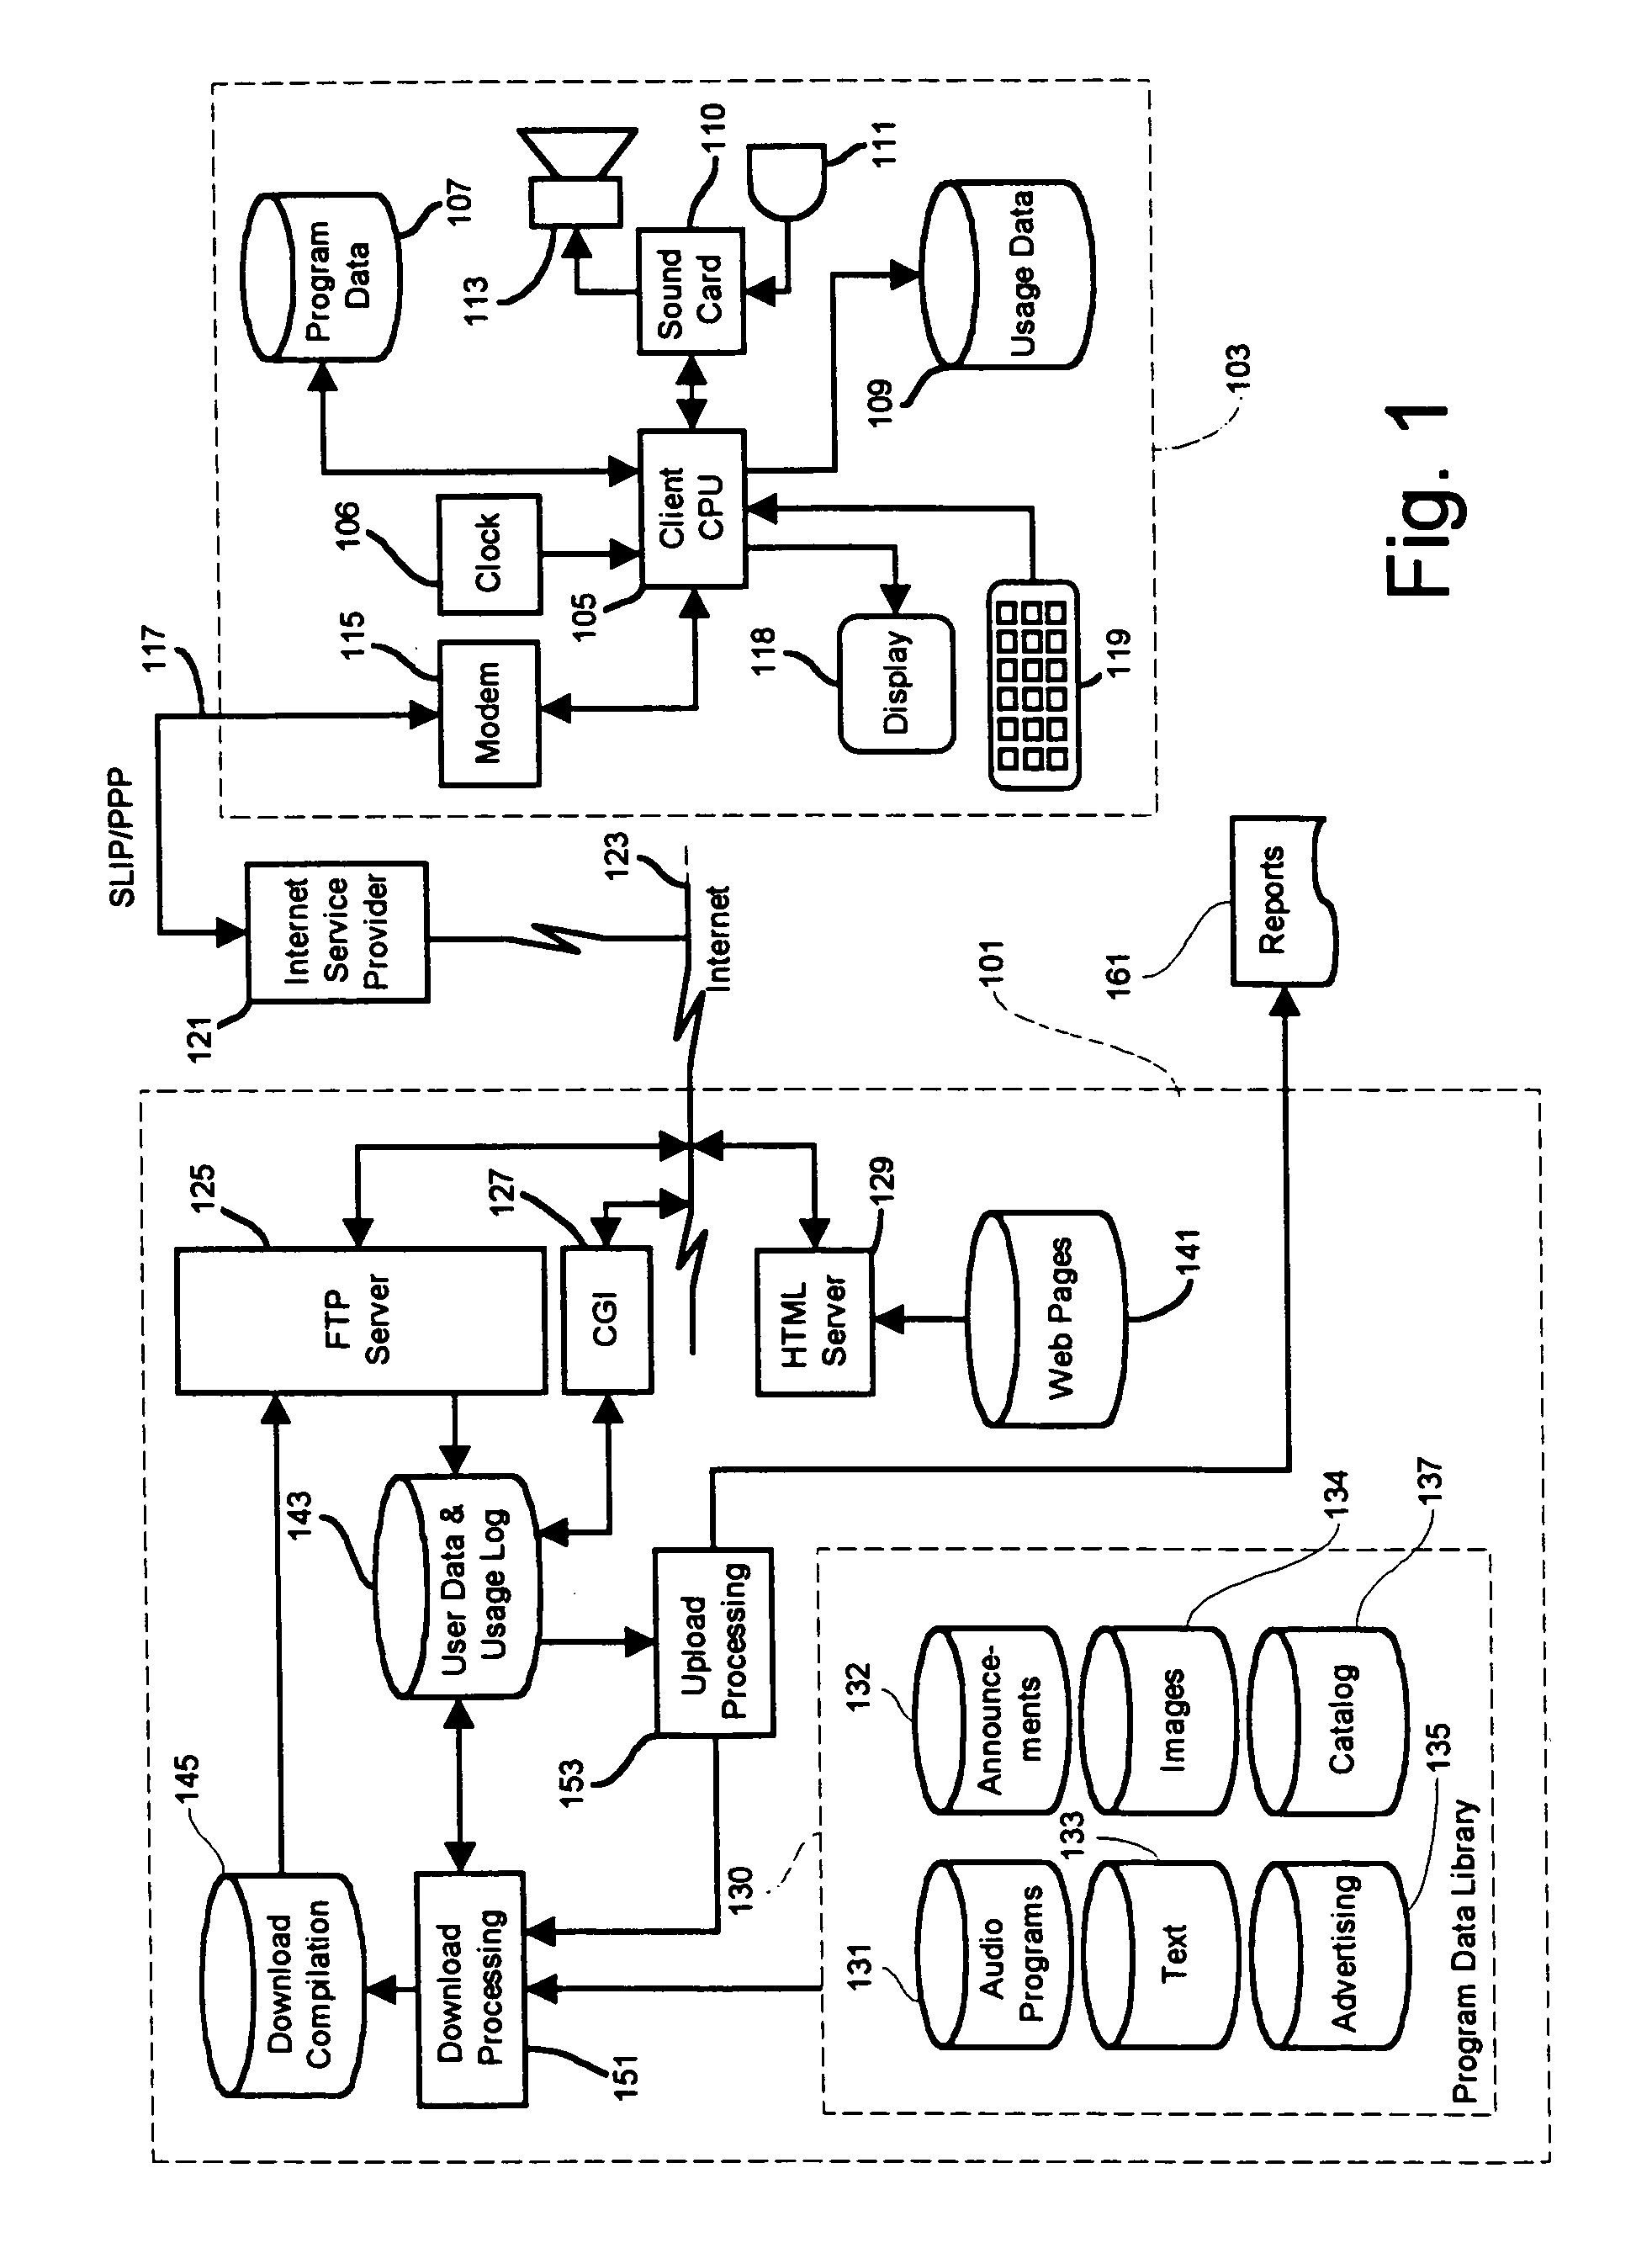 Broadcast program and advertising distribution system